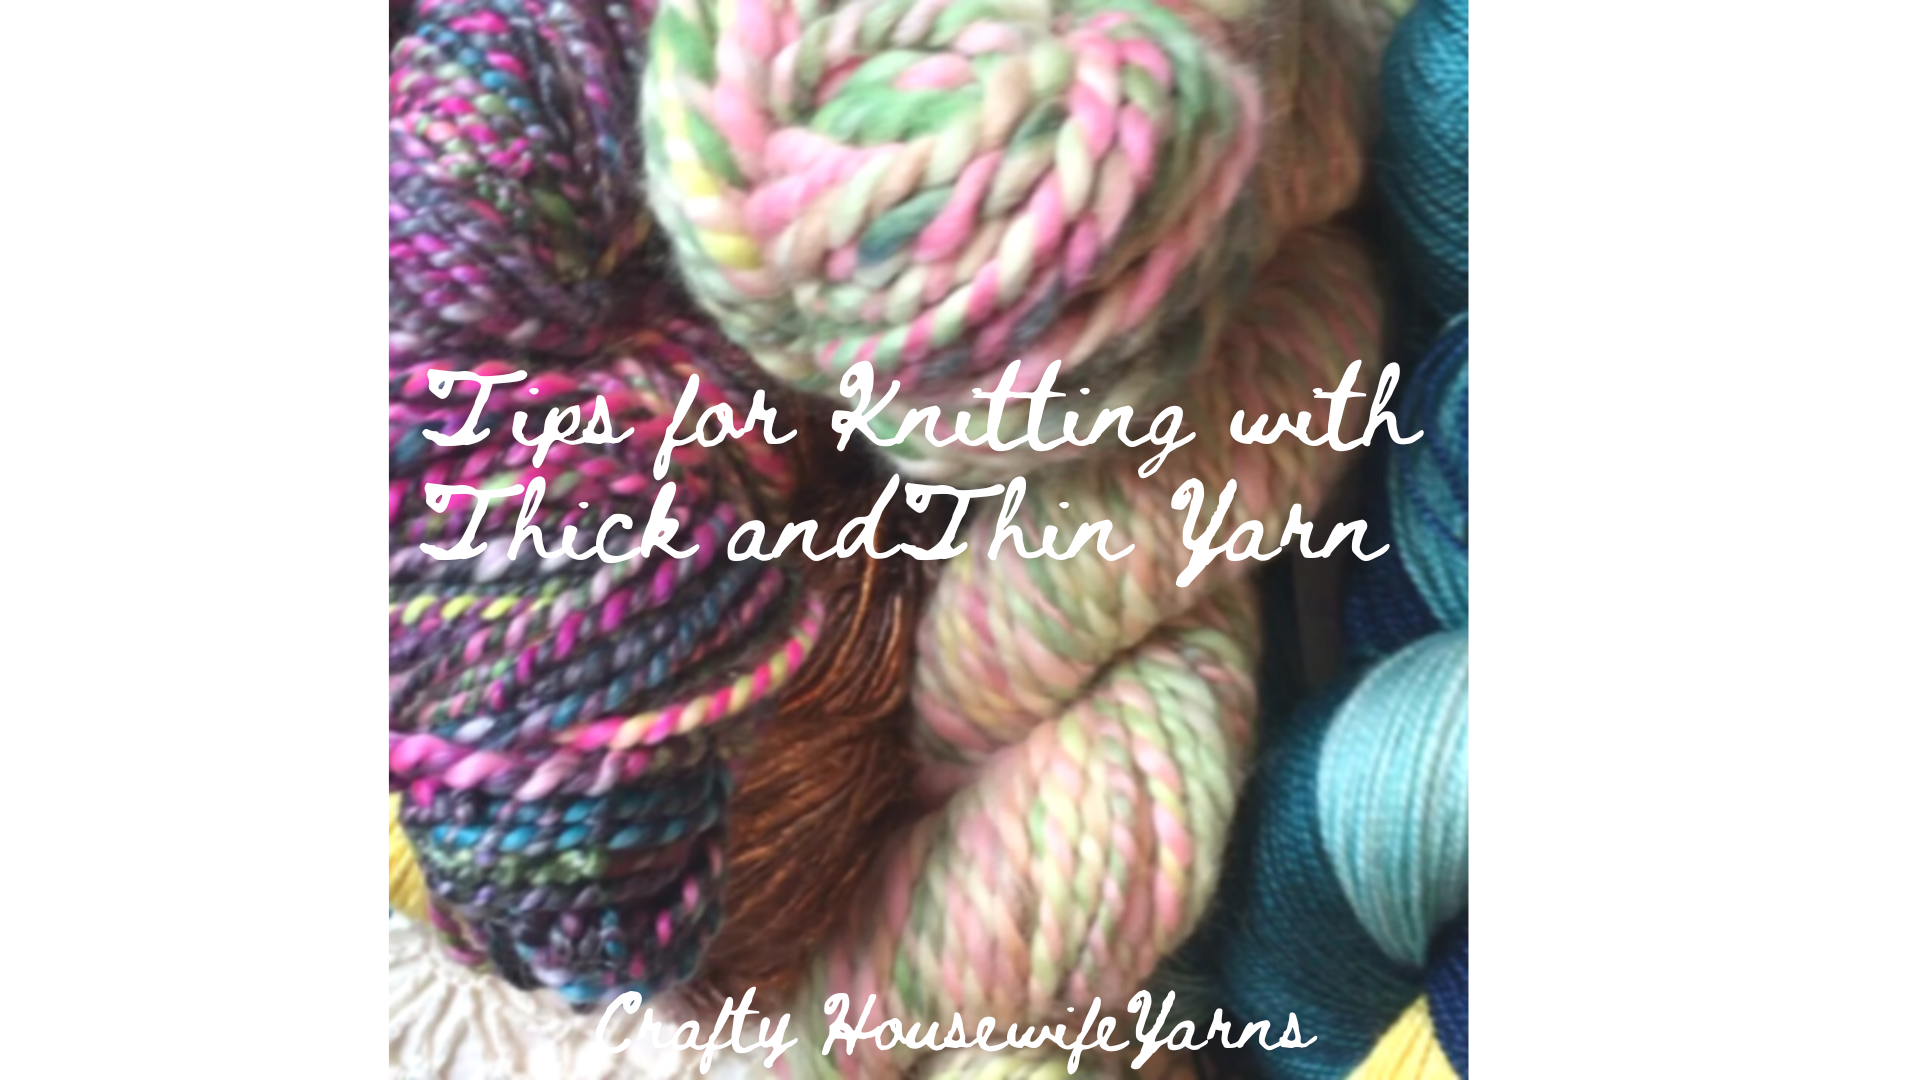 How to knit with Thick and Thin Yarn- Tips for knitting with uneven gage -  handspun yarn blog-Crafty Housewife Yarns & Fiber Arts